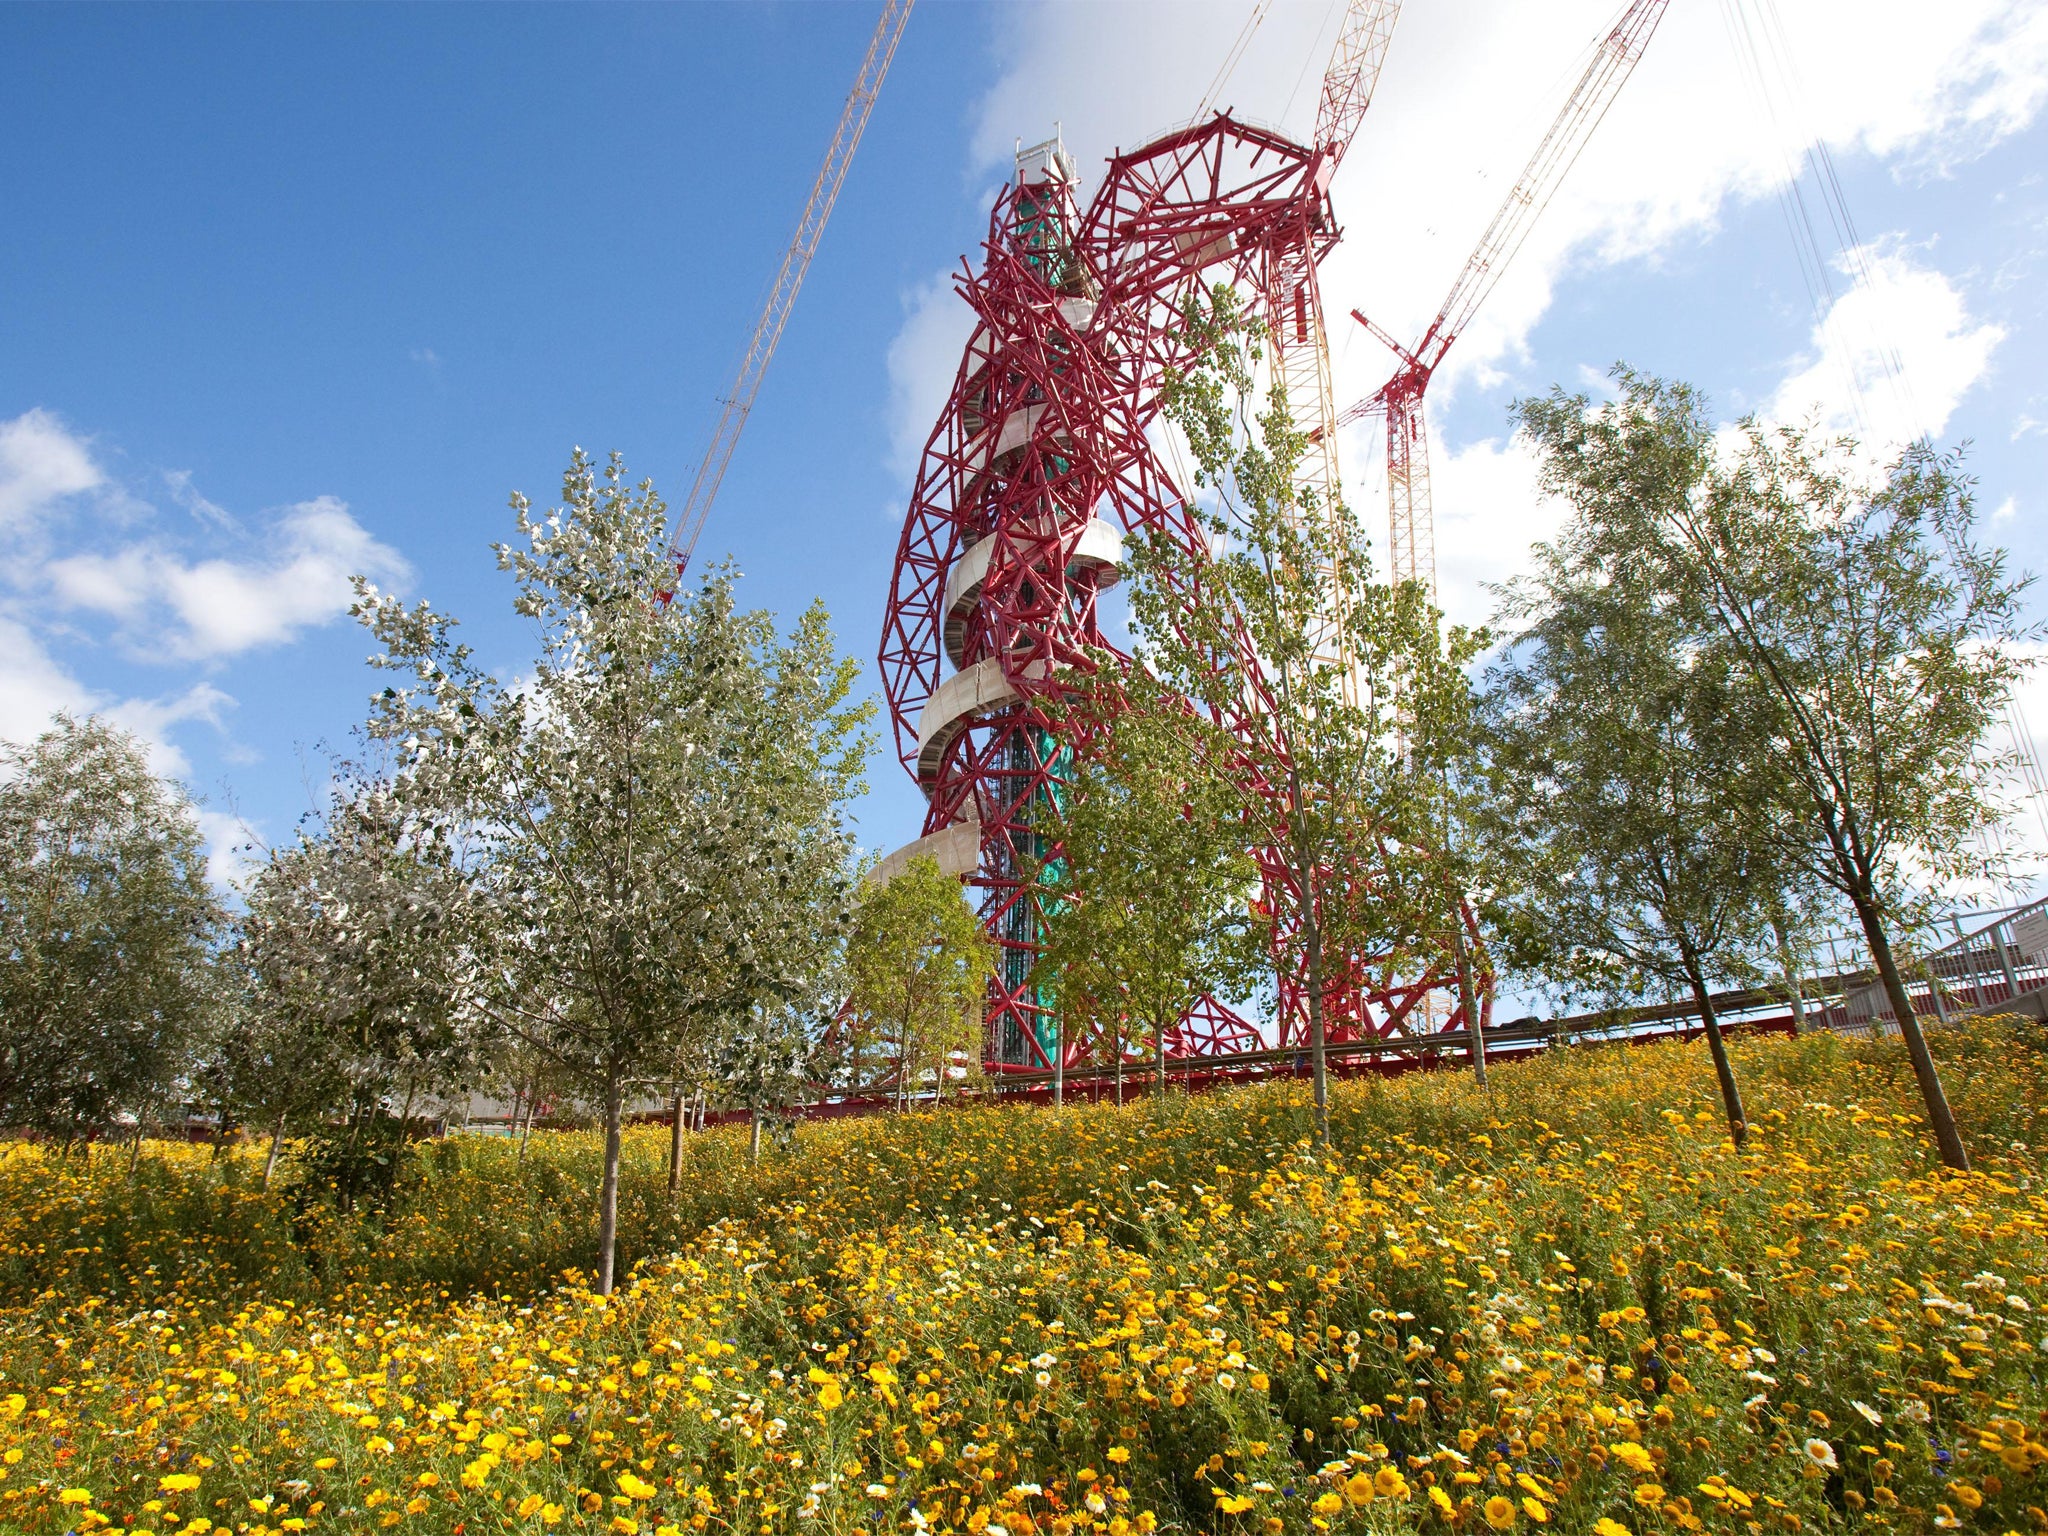 Wildflowers grow in the Olympic Park meadows